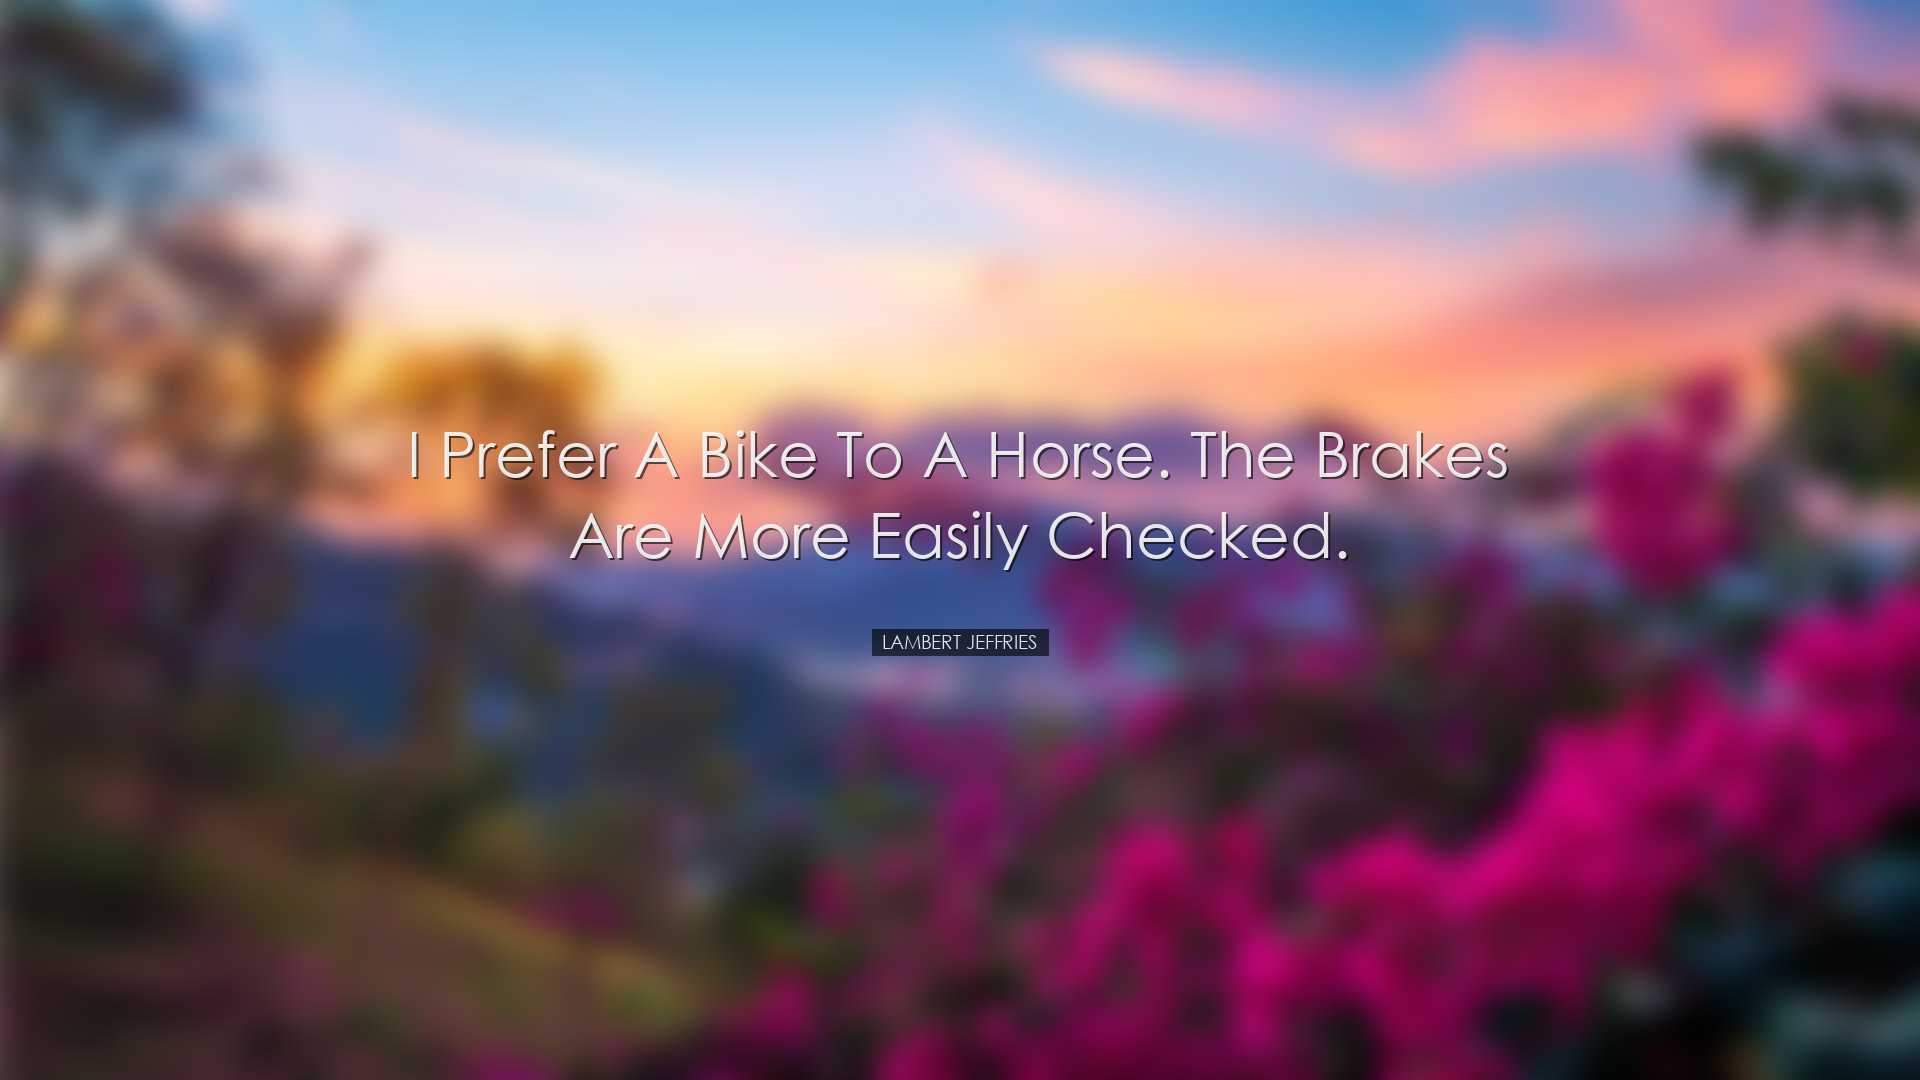 I prefer a bike to a horse. The brakes are more easily checked. -